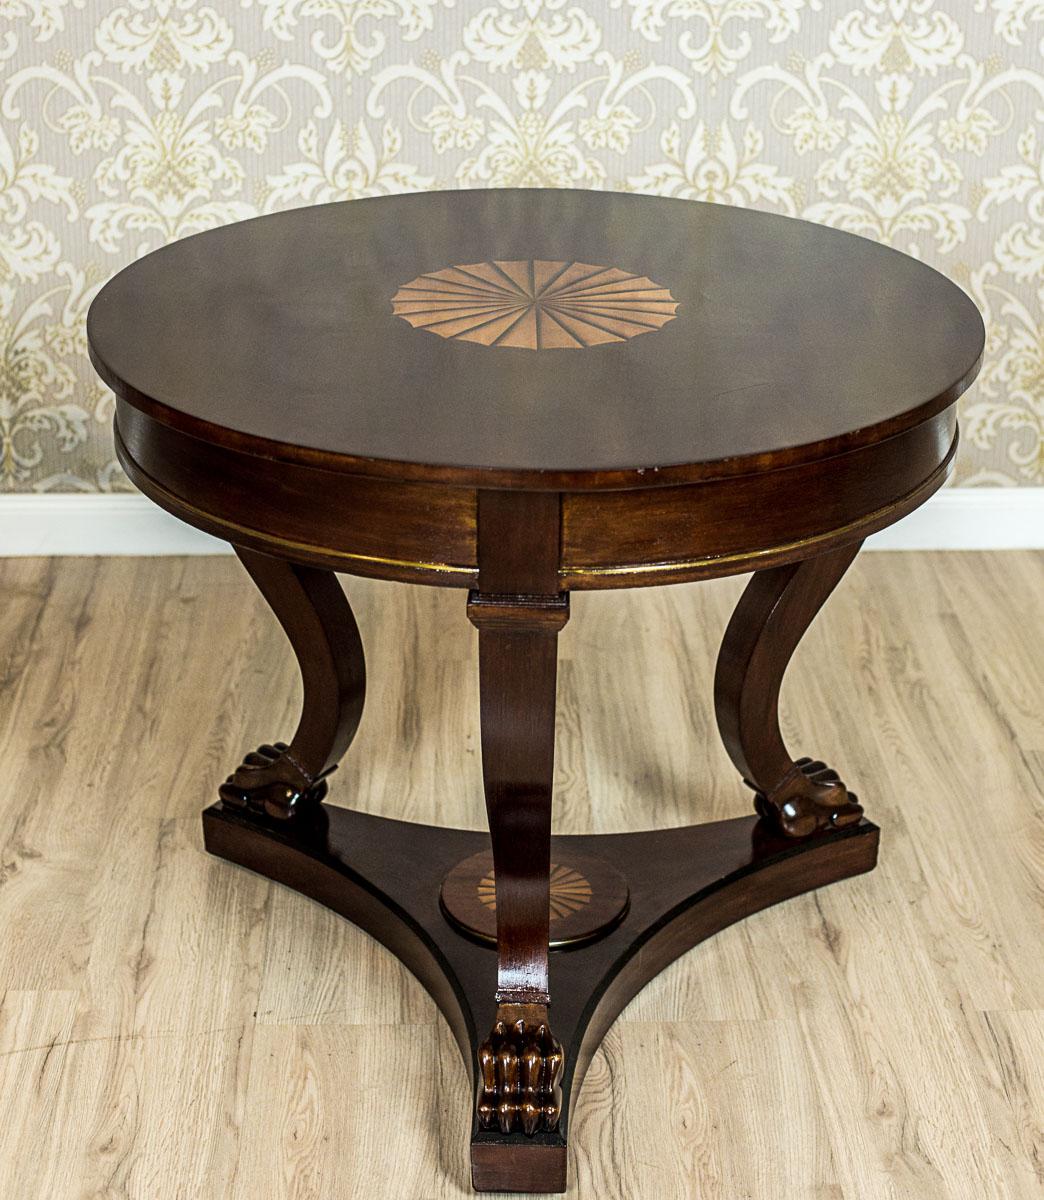 We present you this set of living room furniture, composed of a round table and four chairs.
This suite is from the 1950s, stylized as Biedermeier.
The table is round, supported on three bentwood legs that are placed on a dais in the shape of a